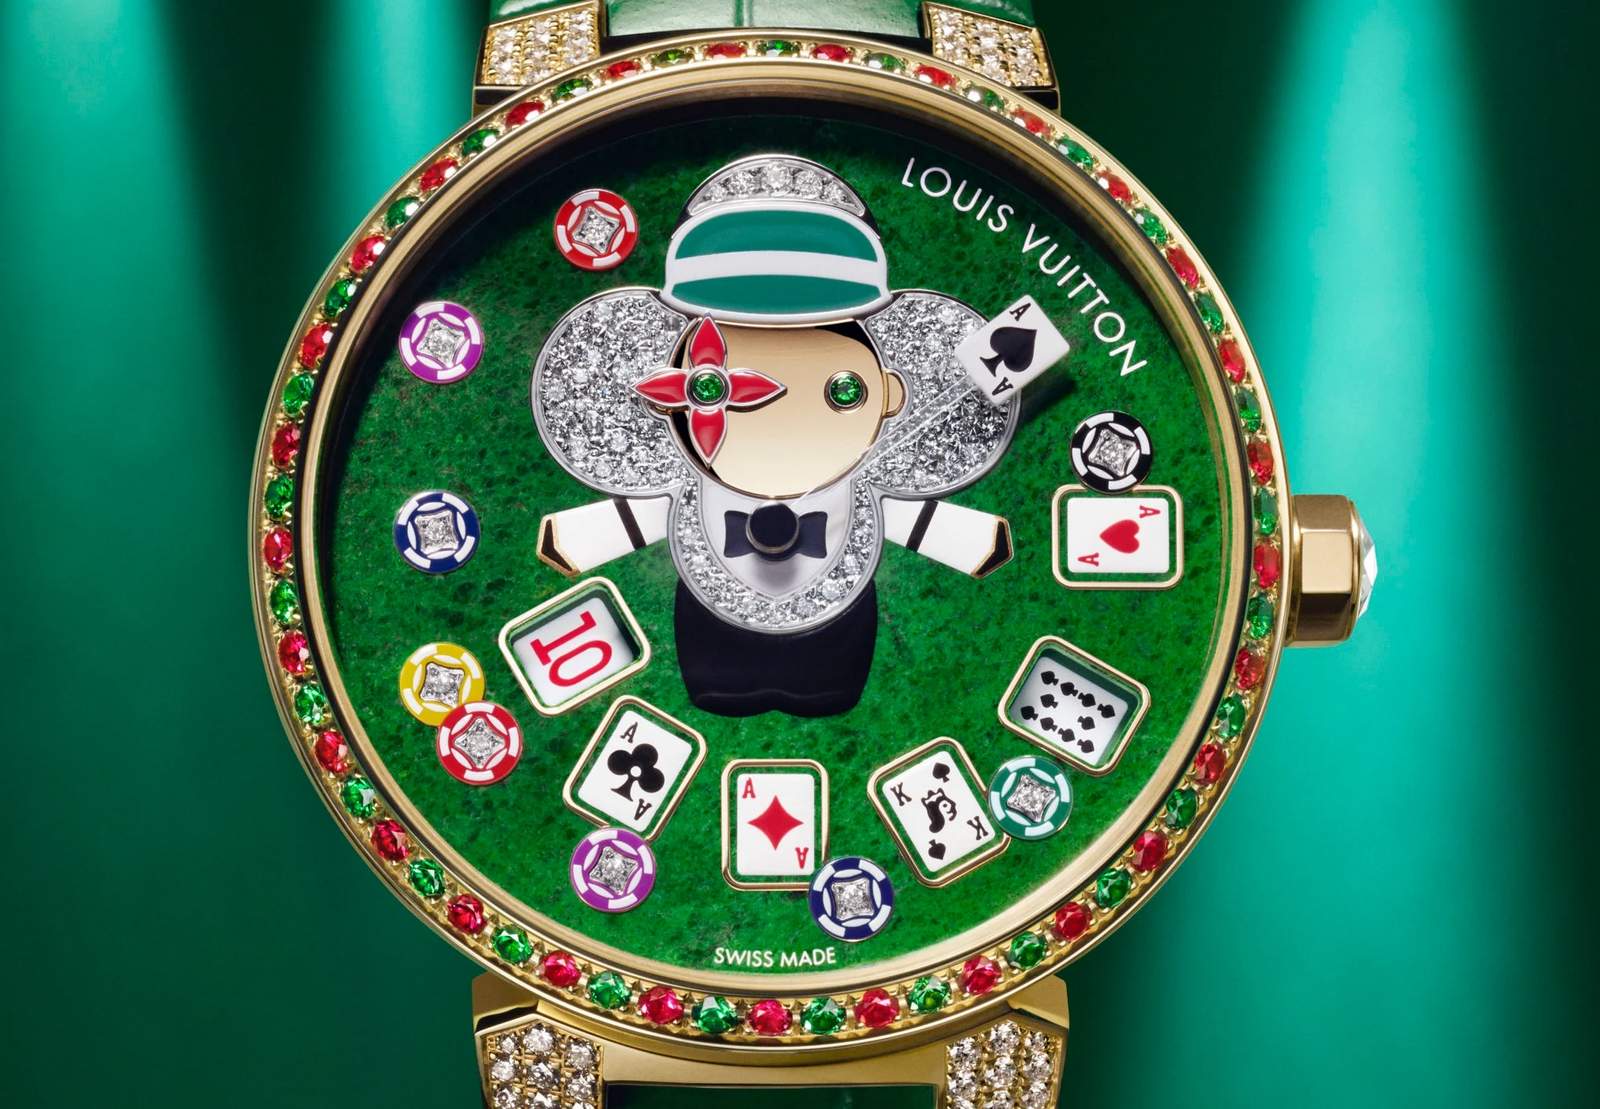 Louis Vuitton Tambour Icons Watch Collection